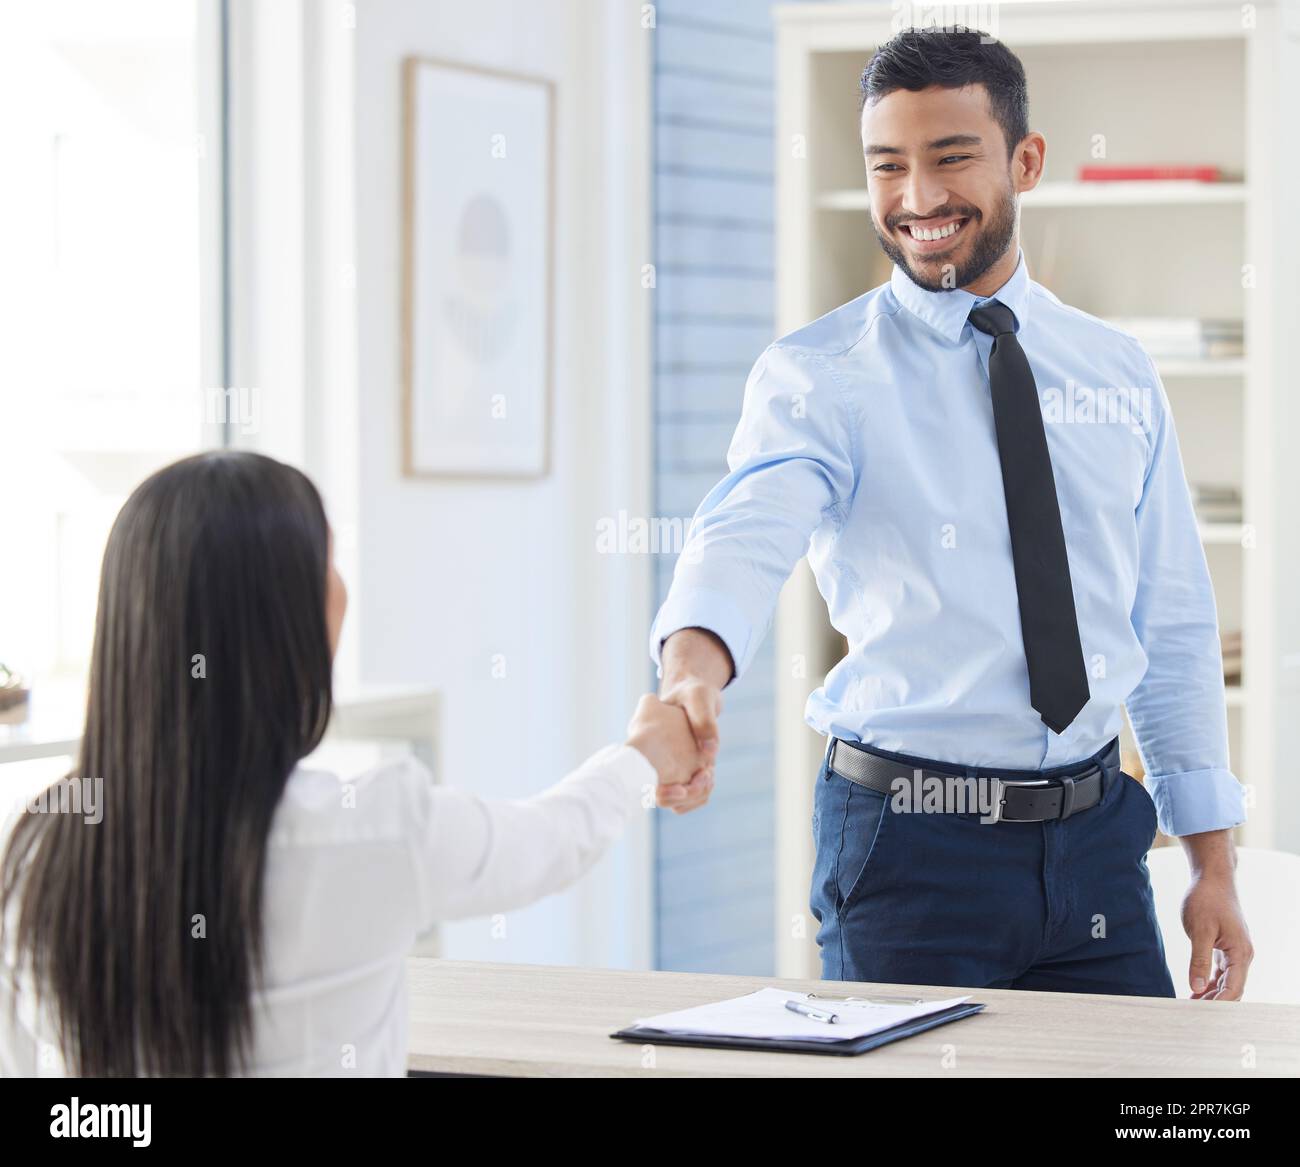 Two mixed race businesspeople in handshake after signing contract in interview. Asian applicant meeting CEO and hiring manger. Candidate hired for job opening, vacancy, office opportunity, promotion Stock Photo